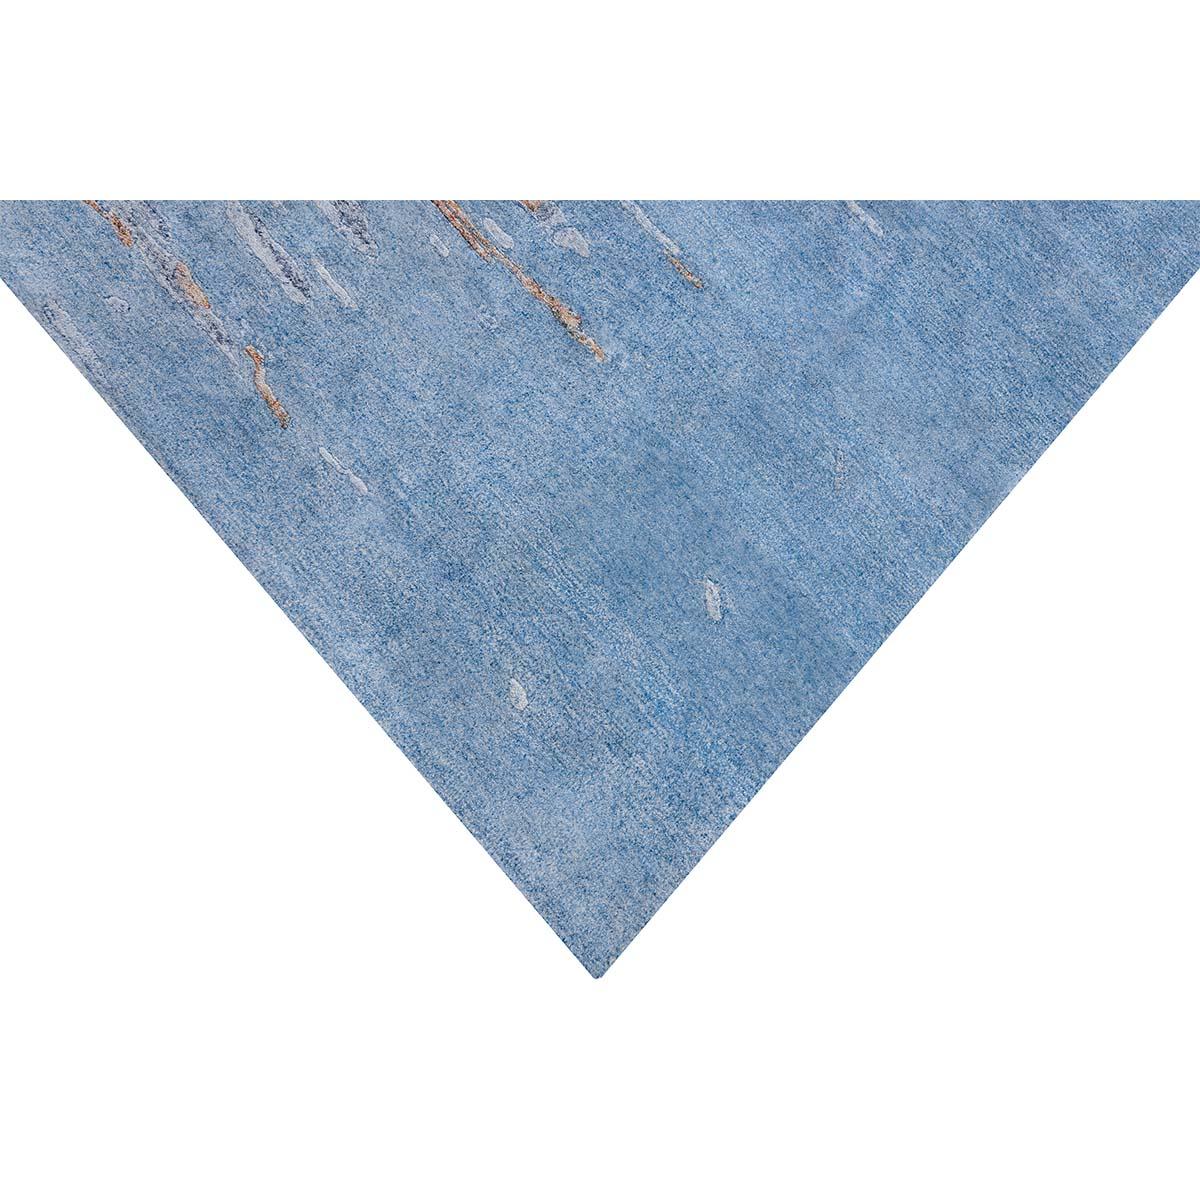 Make a room sit up with these contemporary style rugs. This modern Blue and Light Blue design, along with the use of wool and viscose, creates a soft and subtle effect with a pattern that shimmers in the light. Measures: 12'x15'.